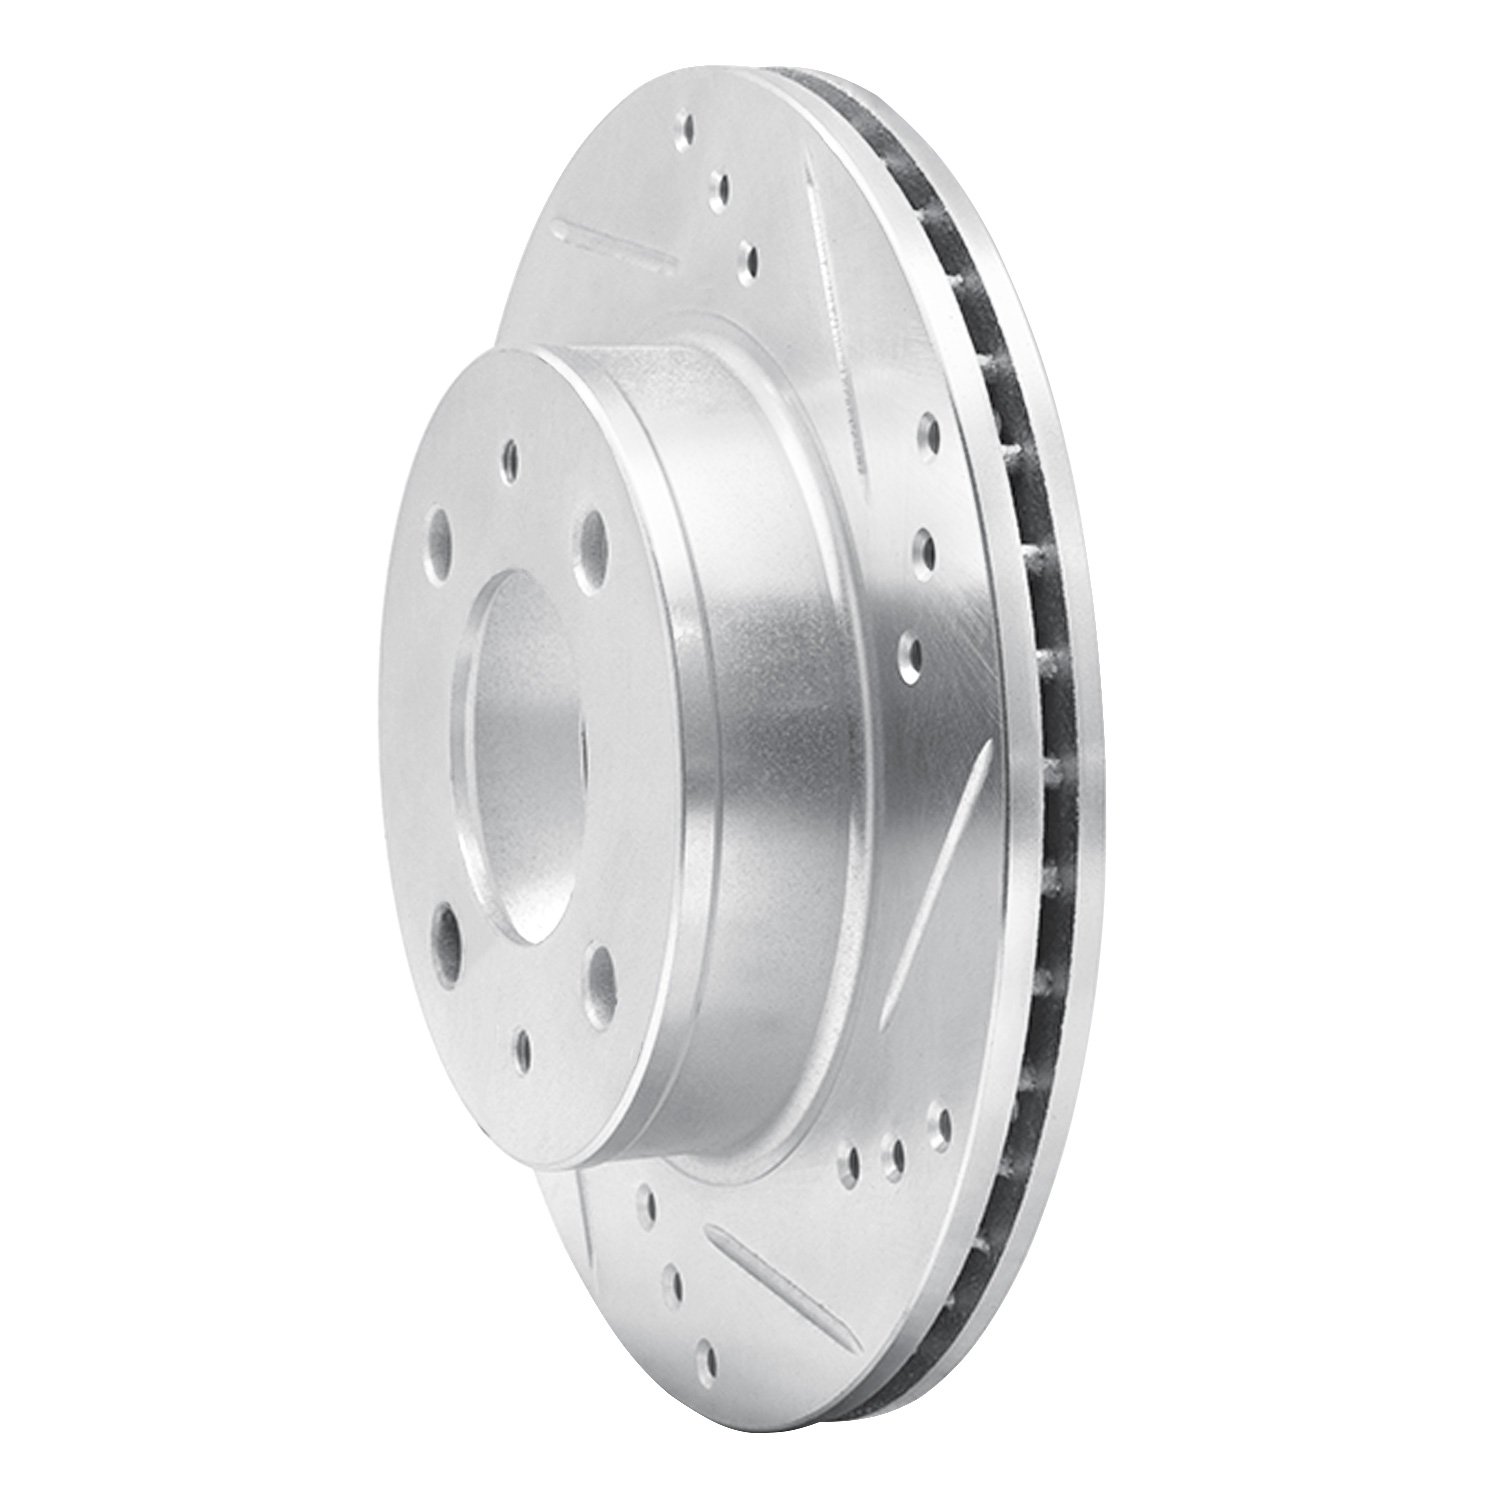 E-Line Drilled & Slotted Silver Brake Rotor, 1998-2012